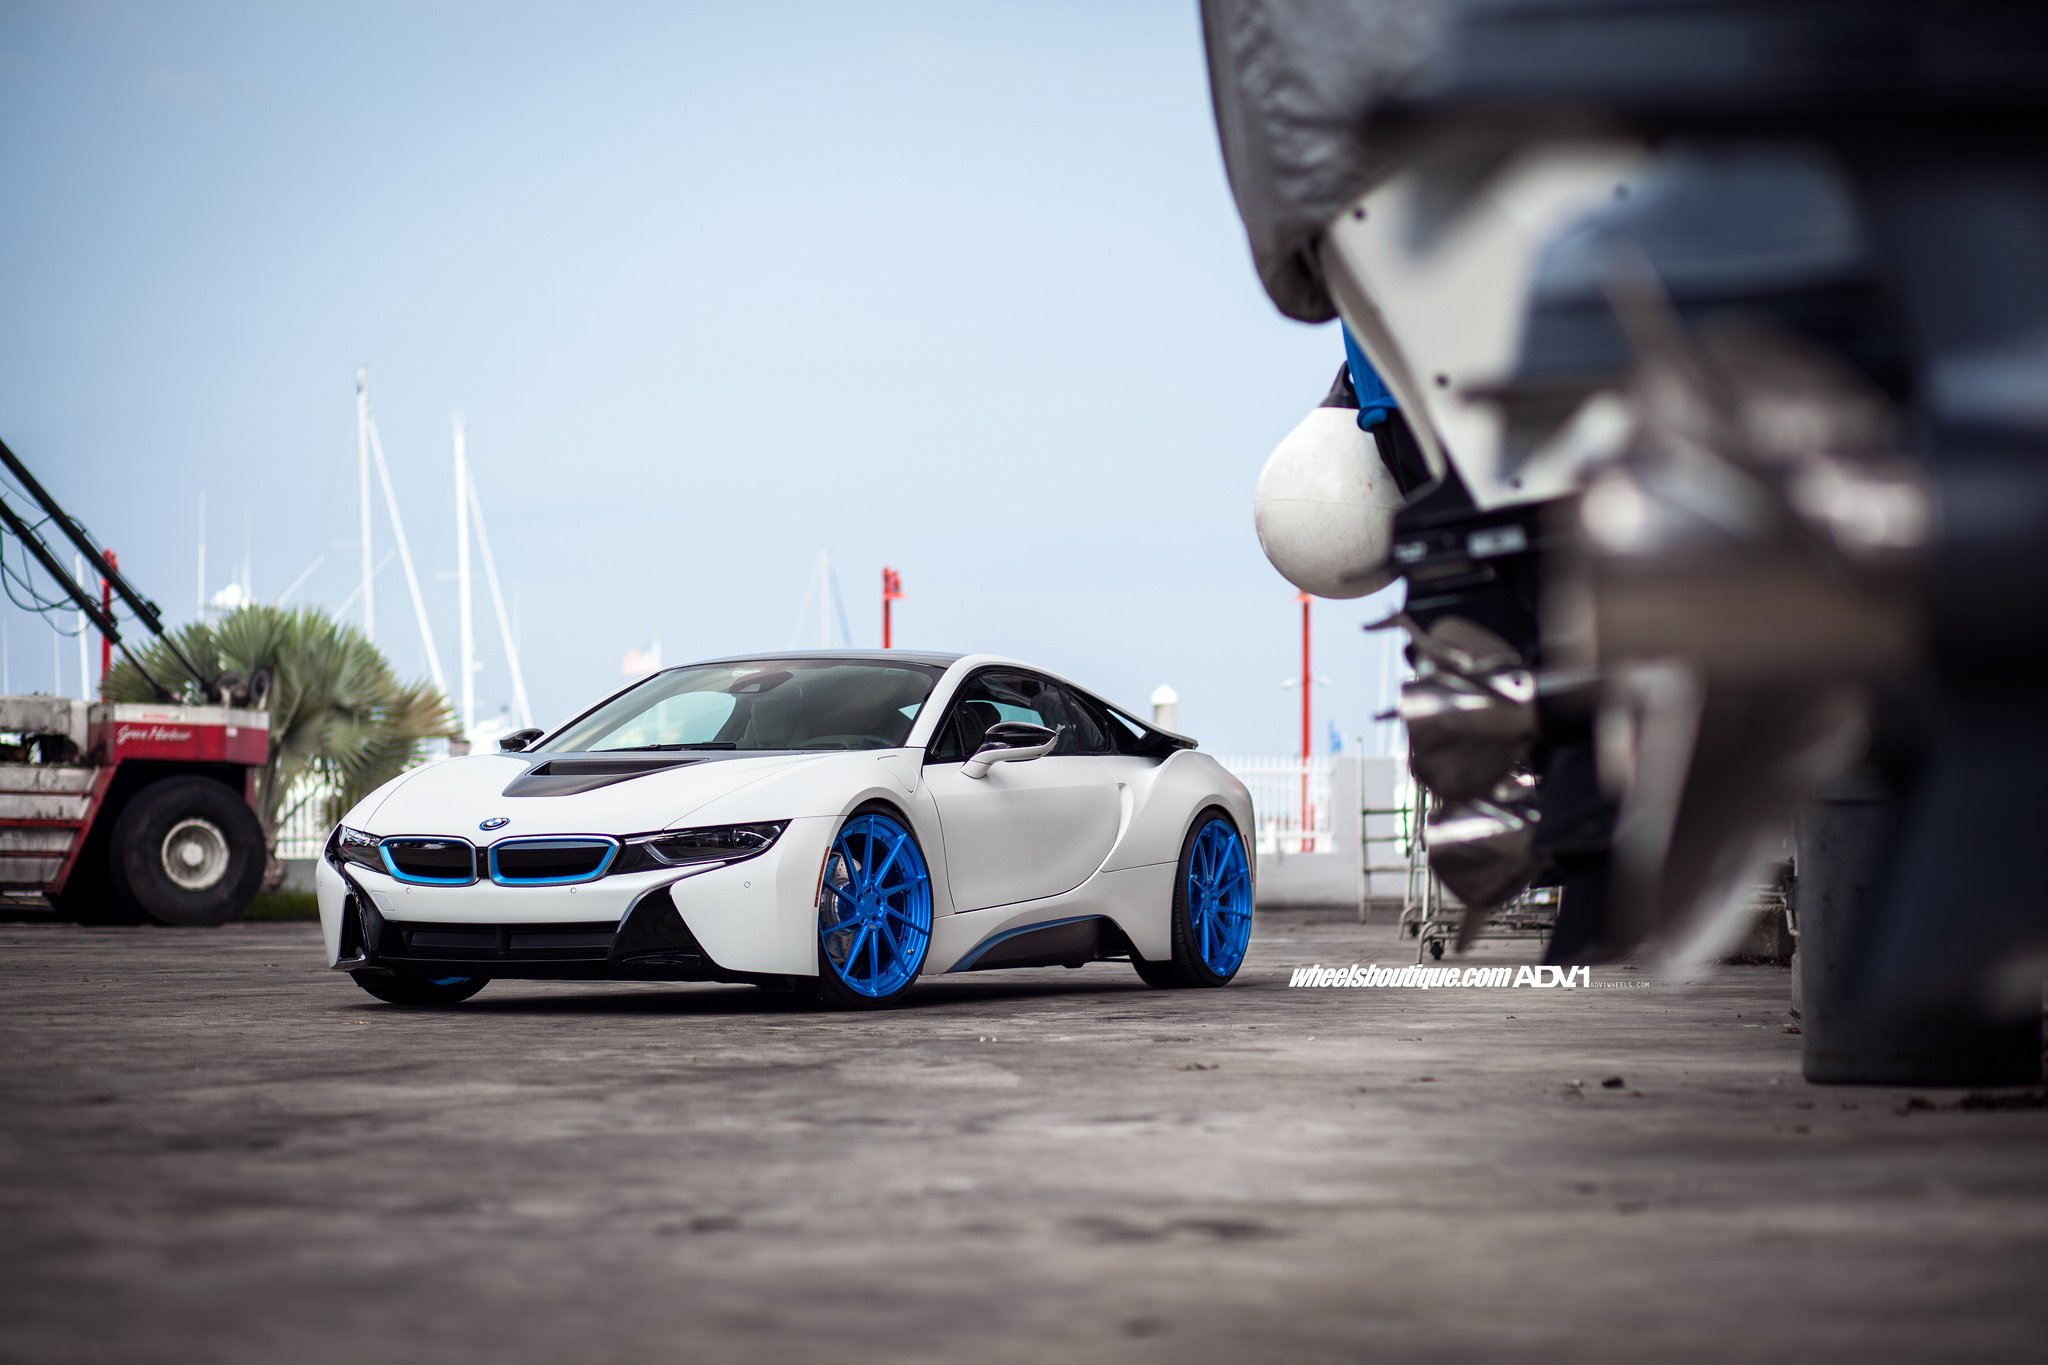 adv, 1, Wheels, Bmw i8, Cars, Electric, Coupe, Tuning, White Wallpaper